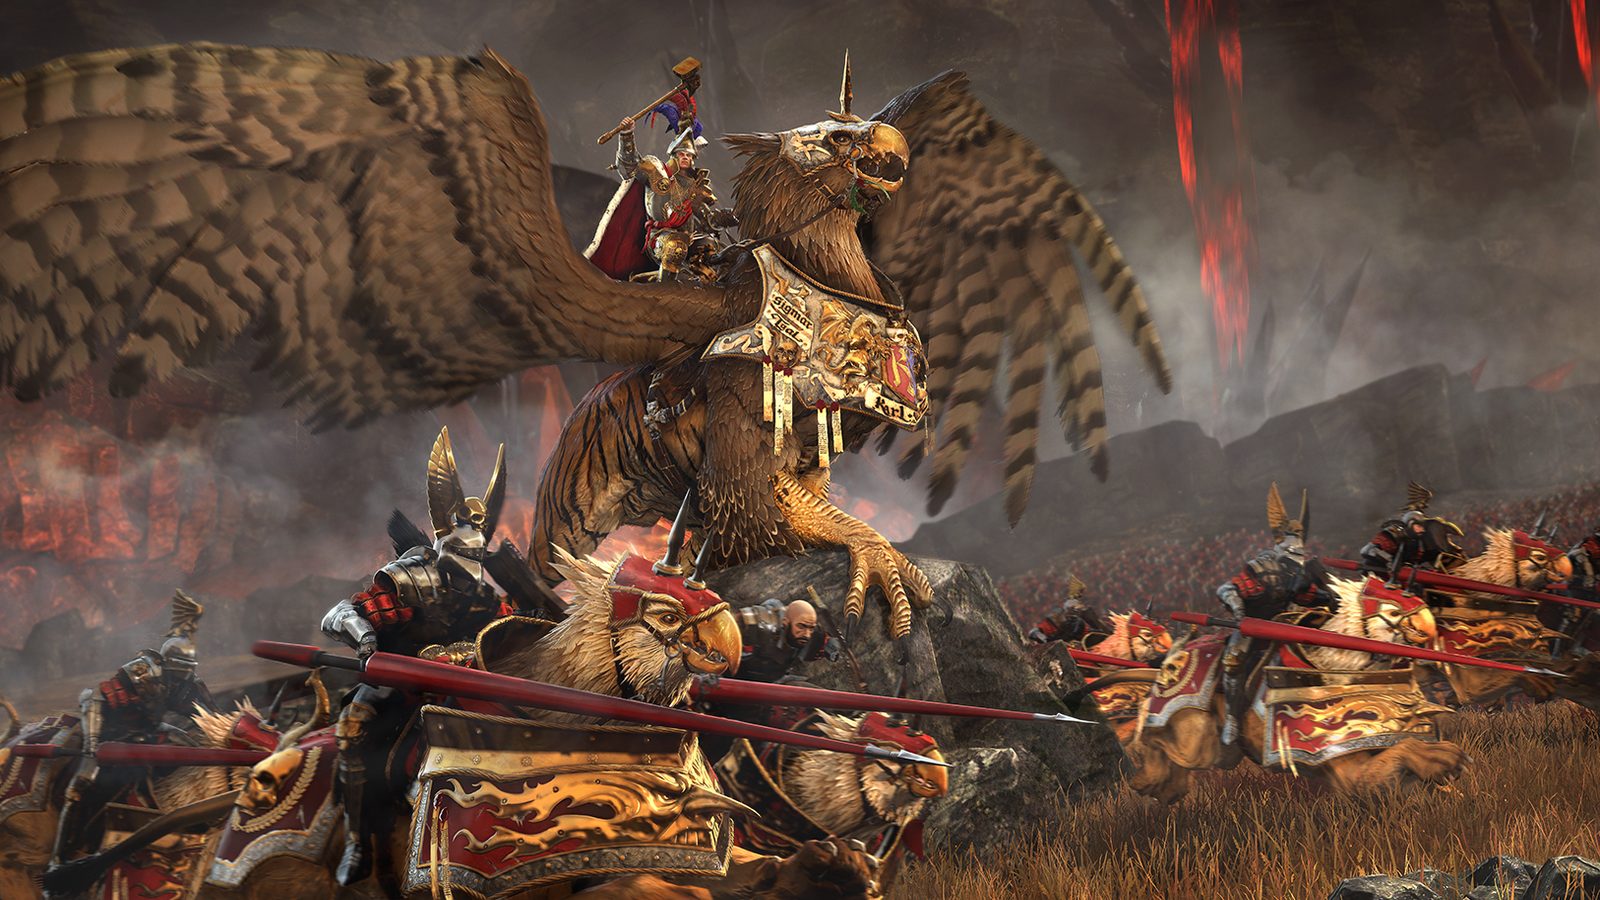 Total War: WARHAMMER II - Mortal Empires for Free - Epic Games Store